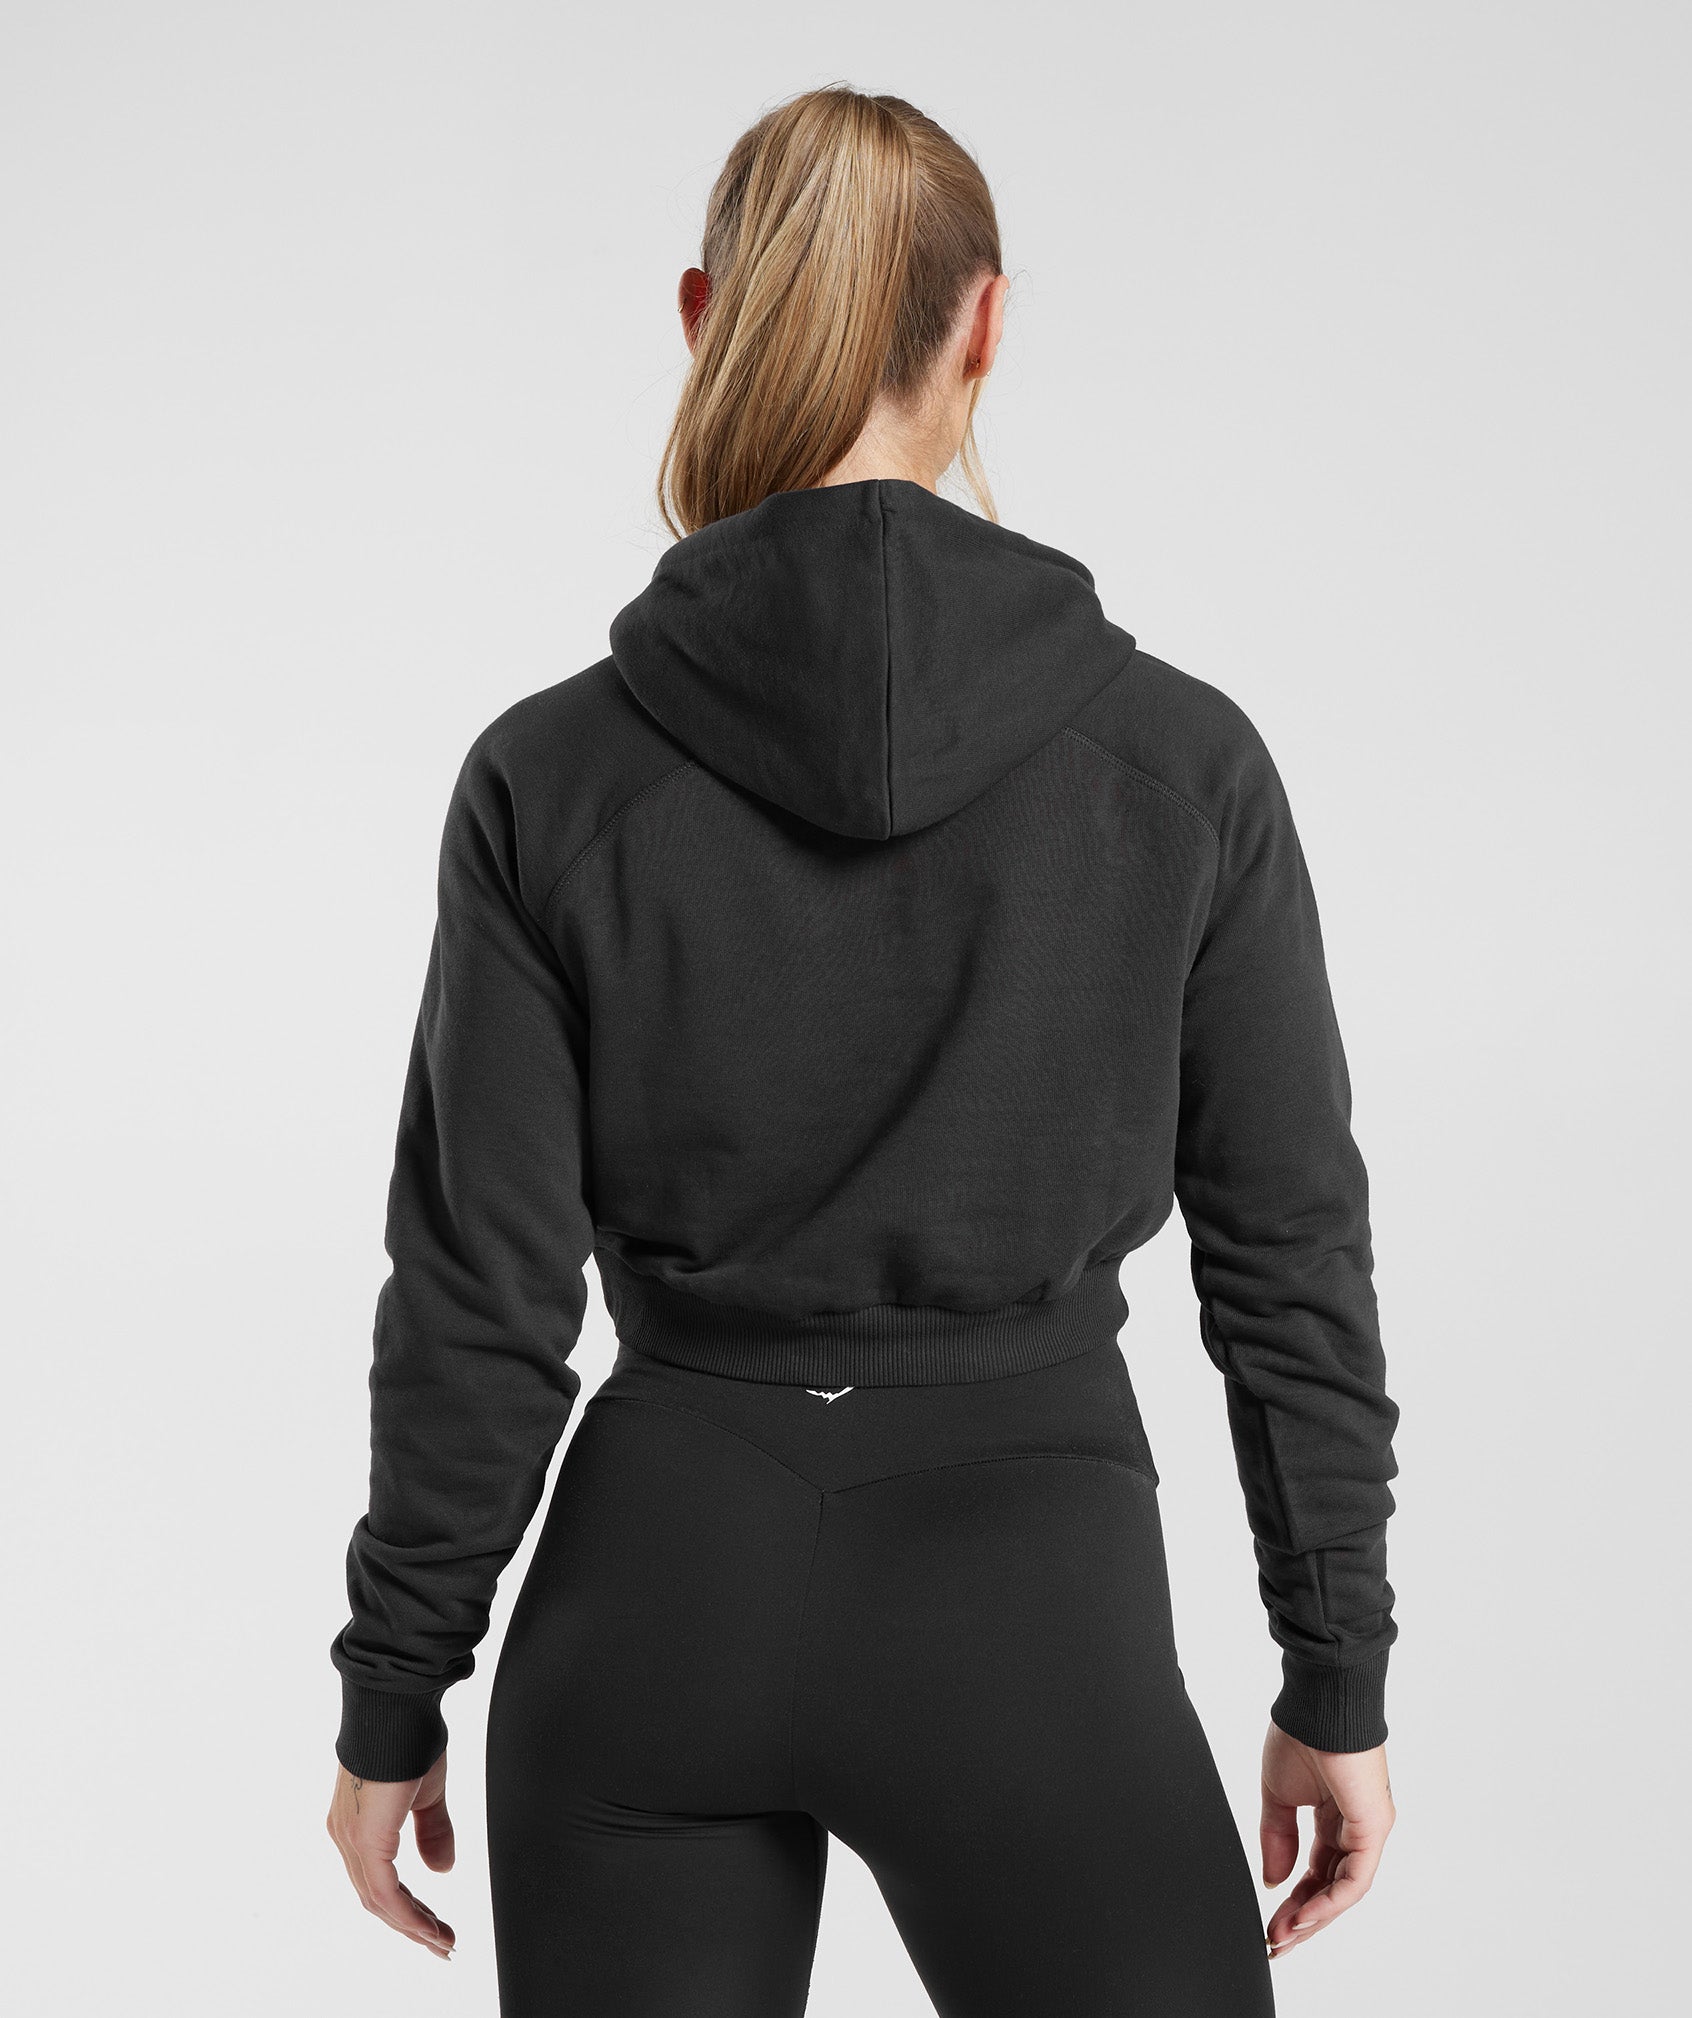 Dezsed Women's Active Casual Thin Cotton Cropped Zip Up Hoodie